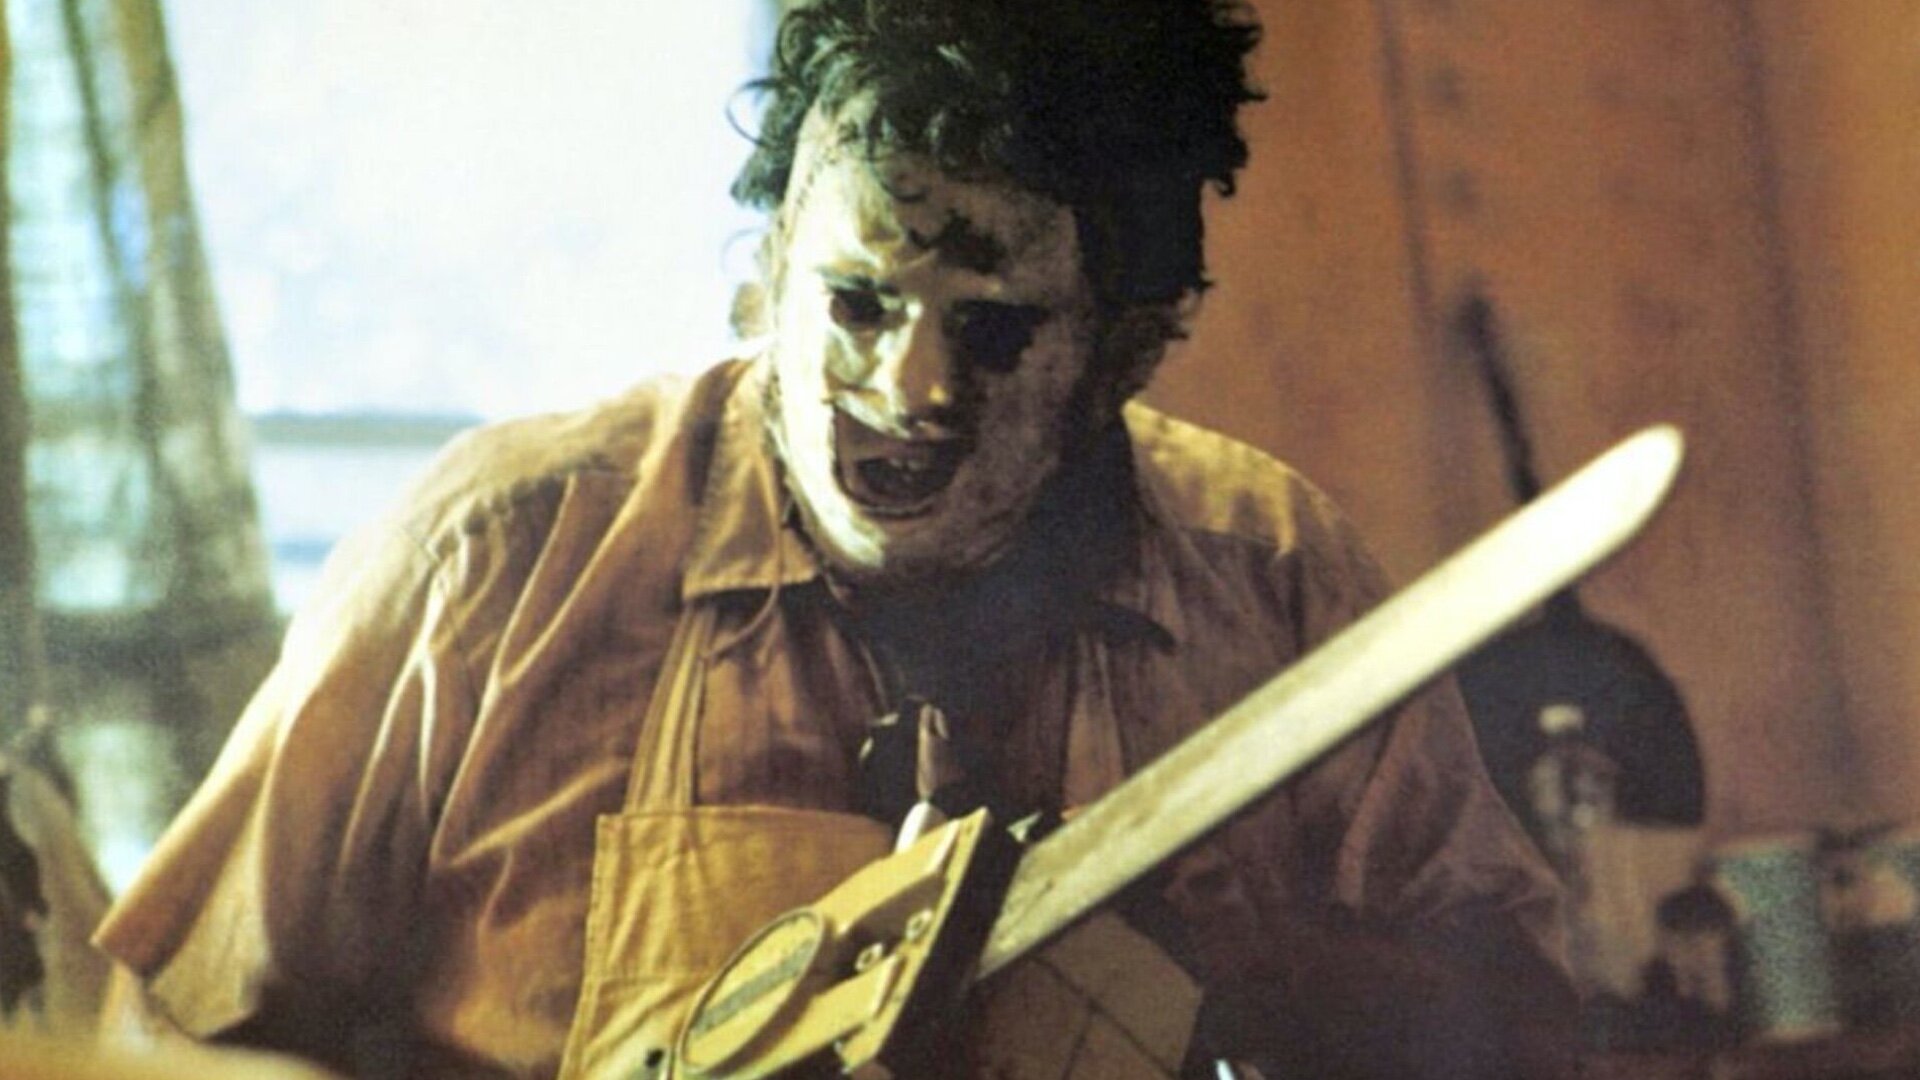 Why Do The Texas Chainsaw Massacre Sequels All Suck?